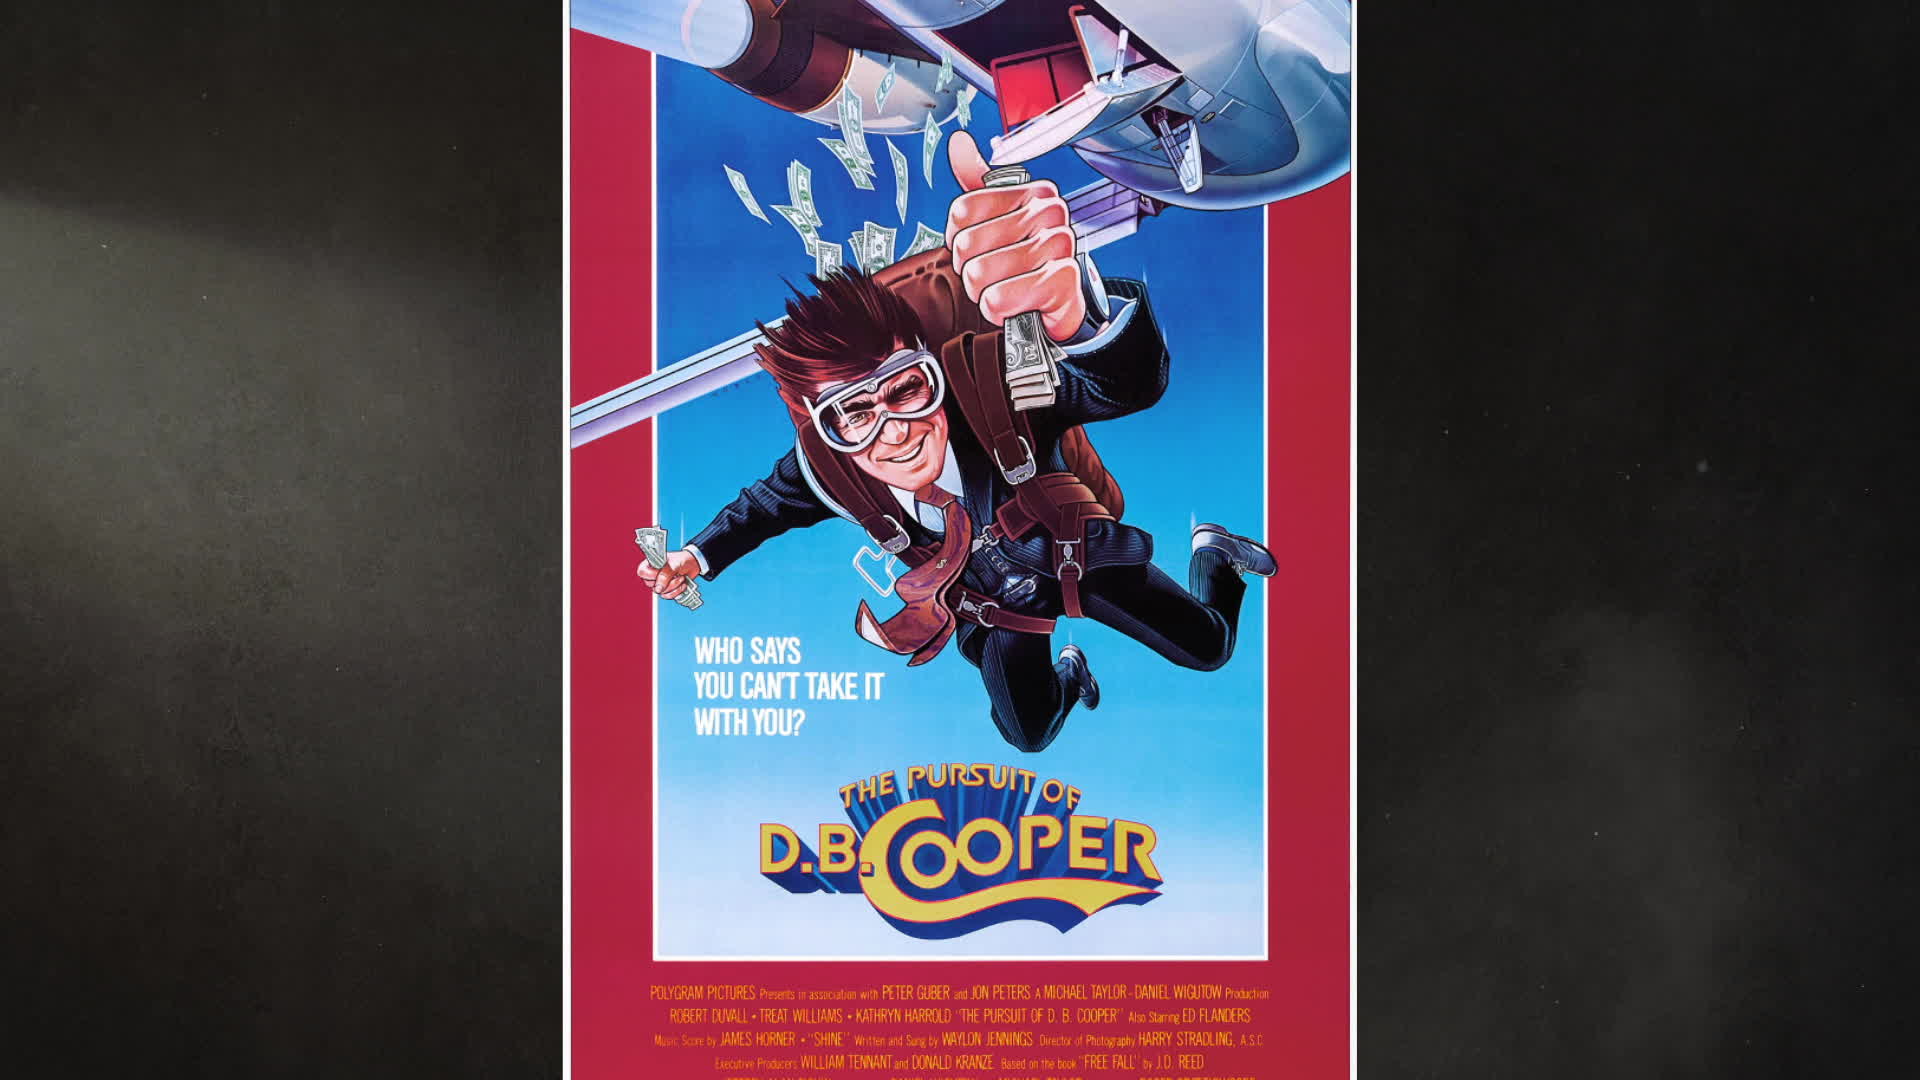 Who is D.B. Cooper?